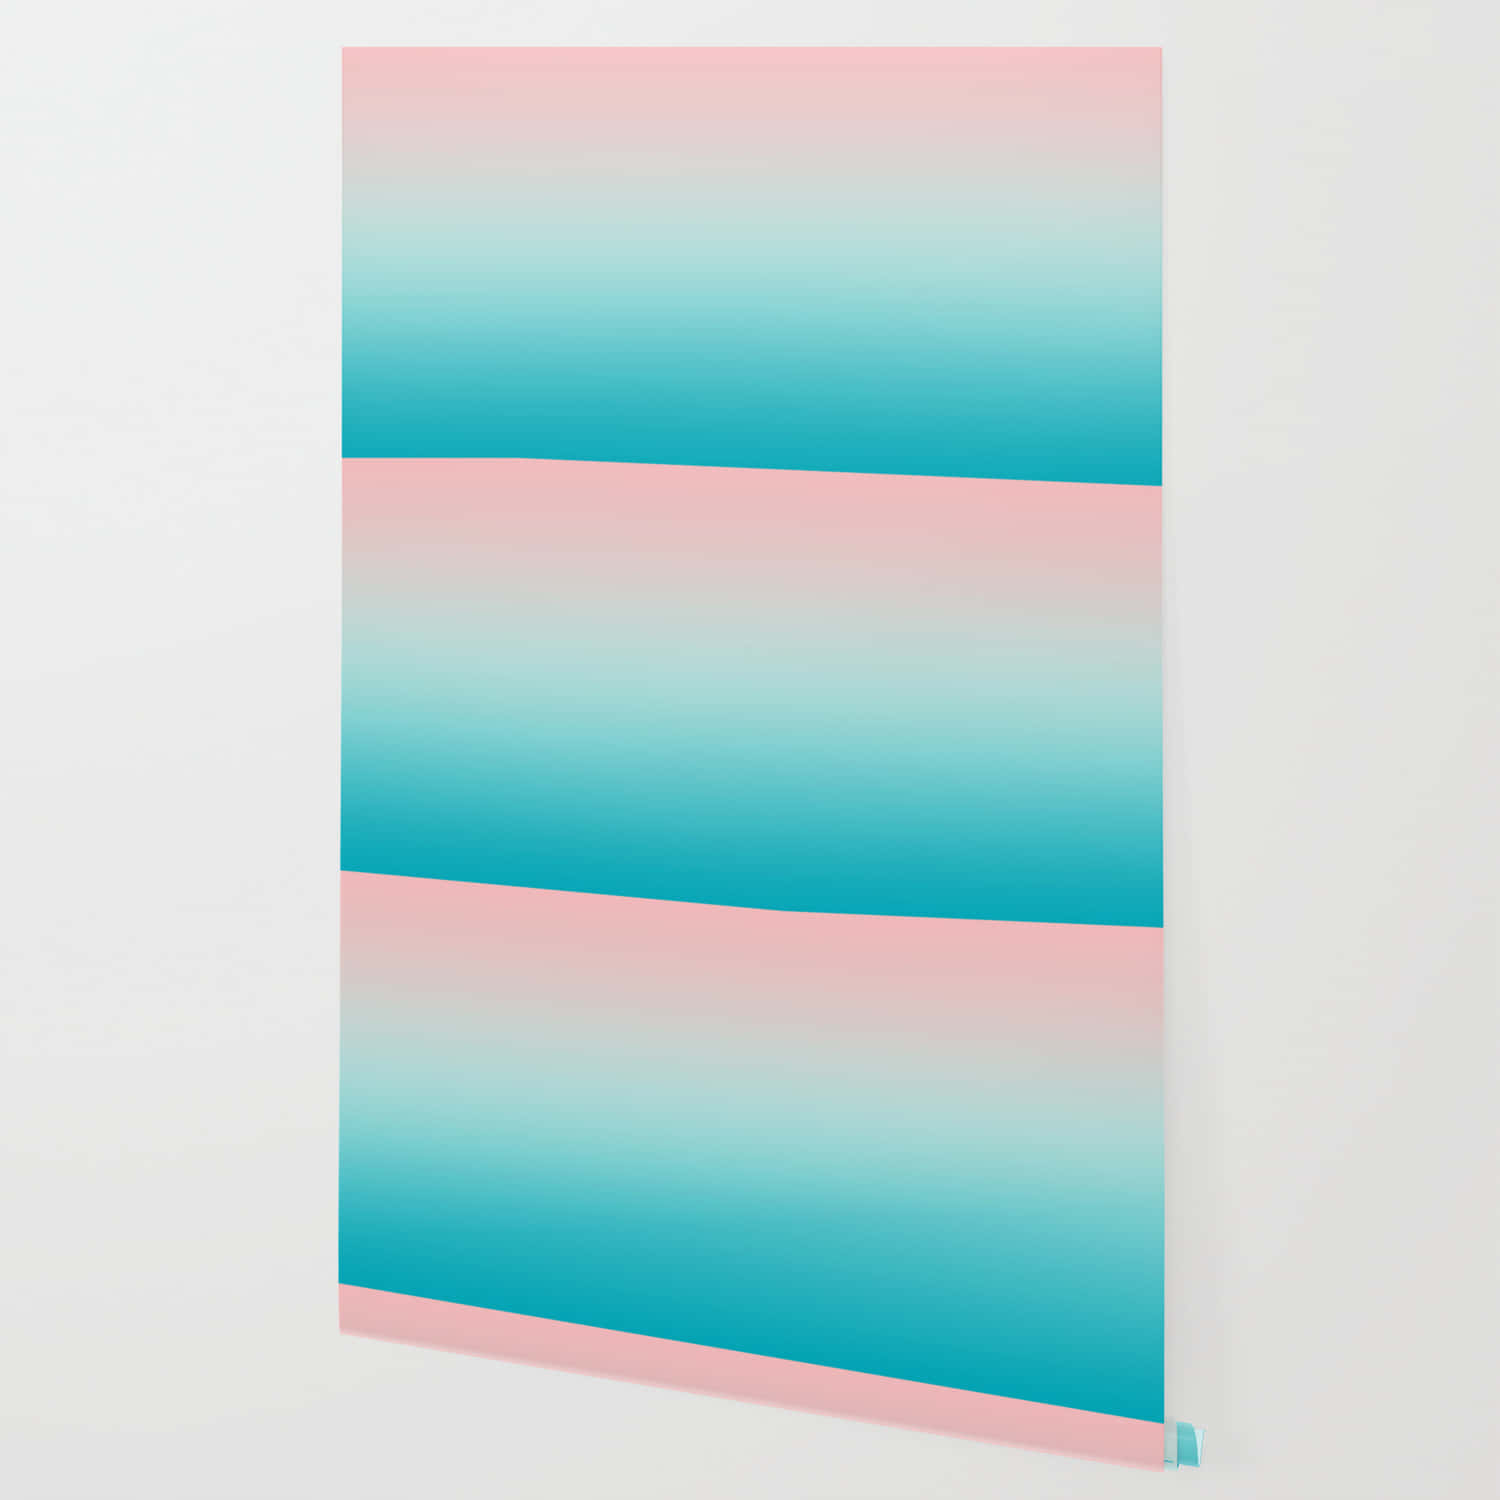 Experience a dreamy pastel ombre Wallpaper